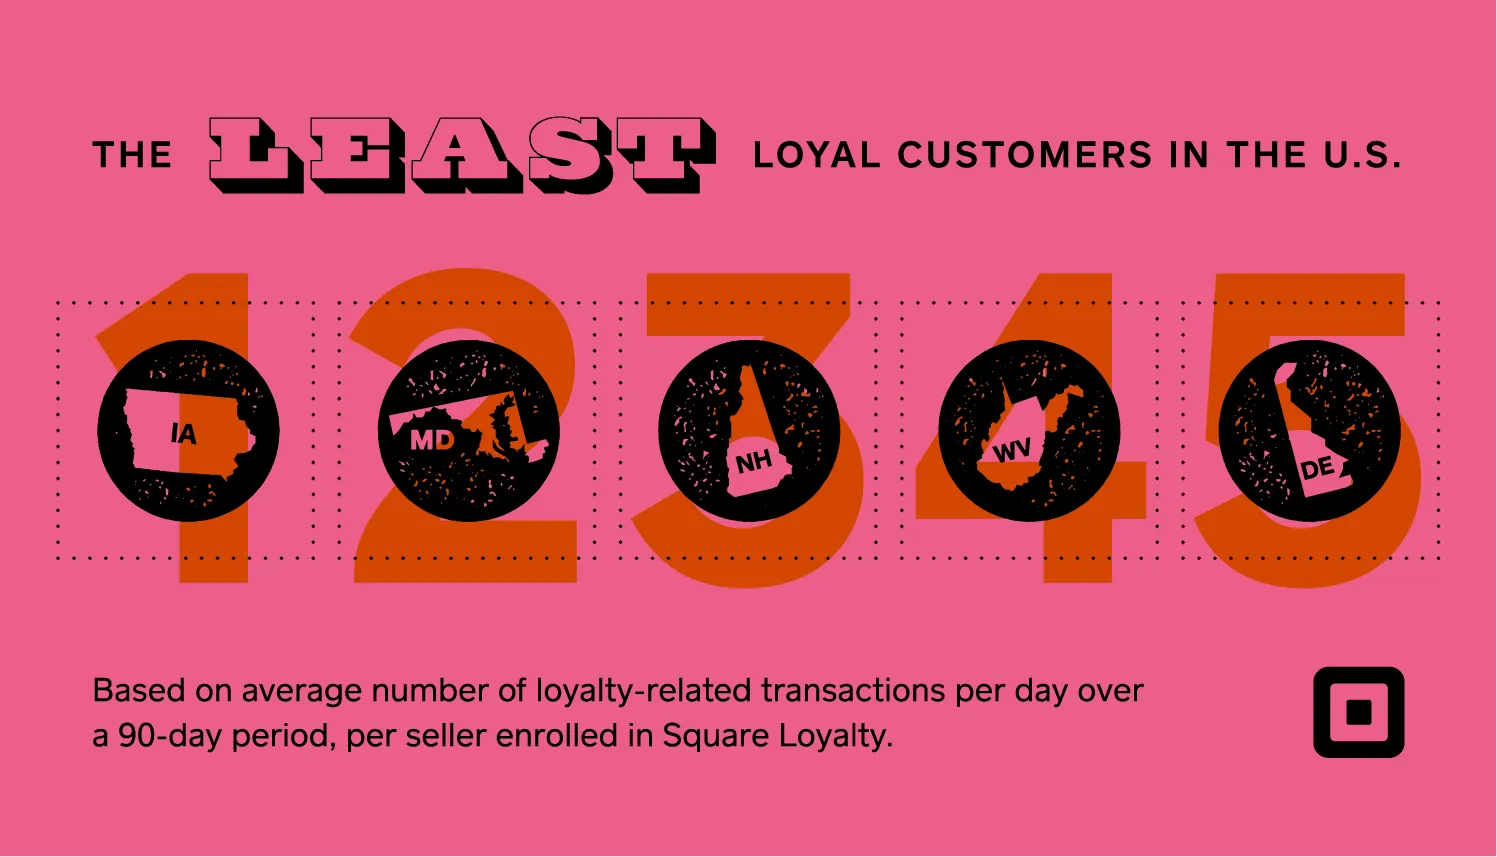 least loyal customers infographic